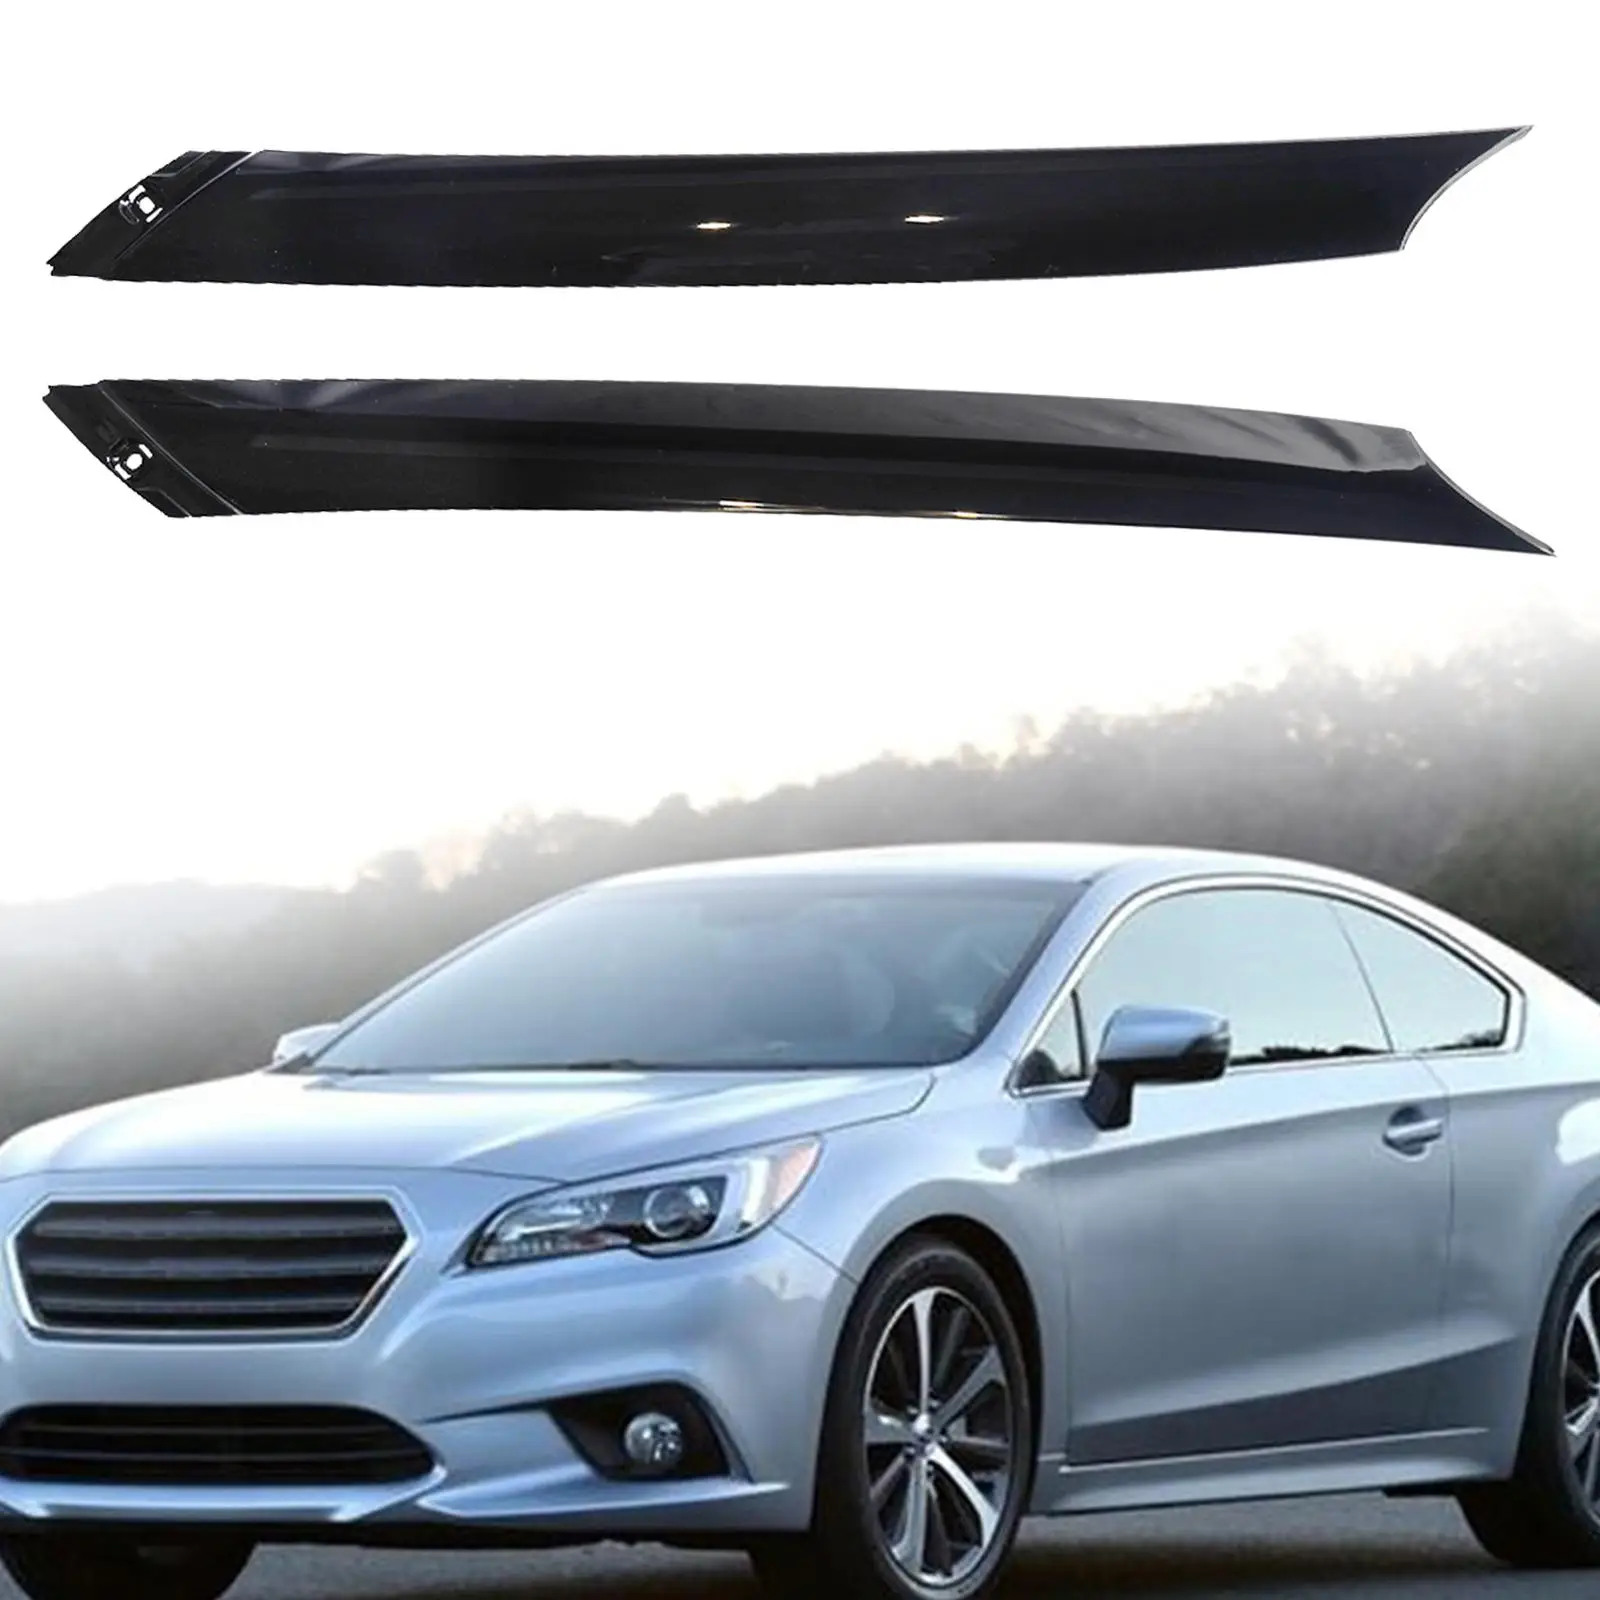 86170-2V000 Windshield Pillar Trim Trims Accessories Easy to Install Outer Trim Pillar Right & Left for Hyundai Veloster